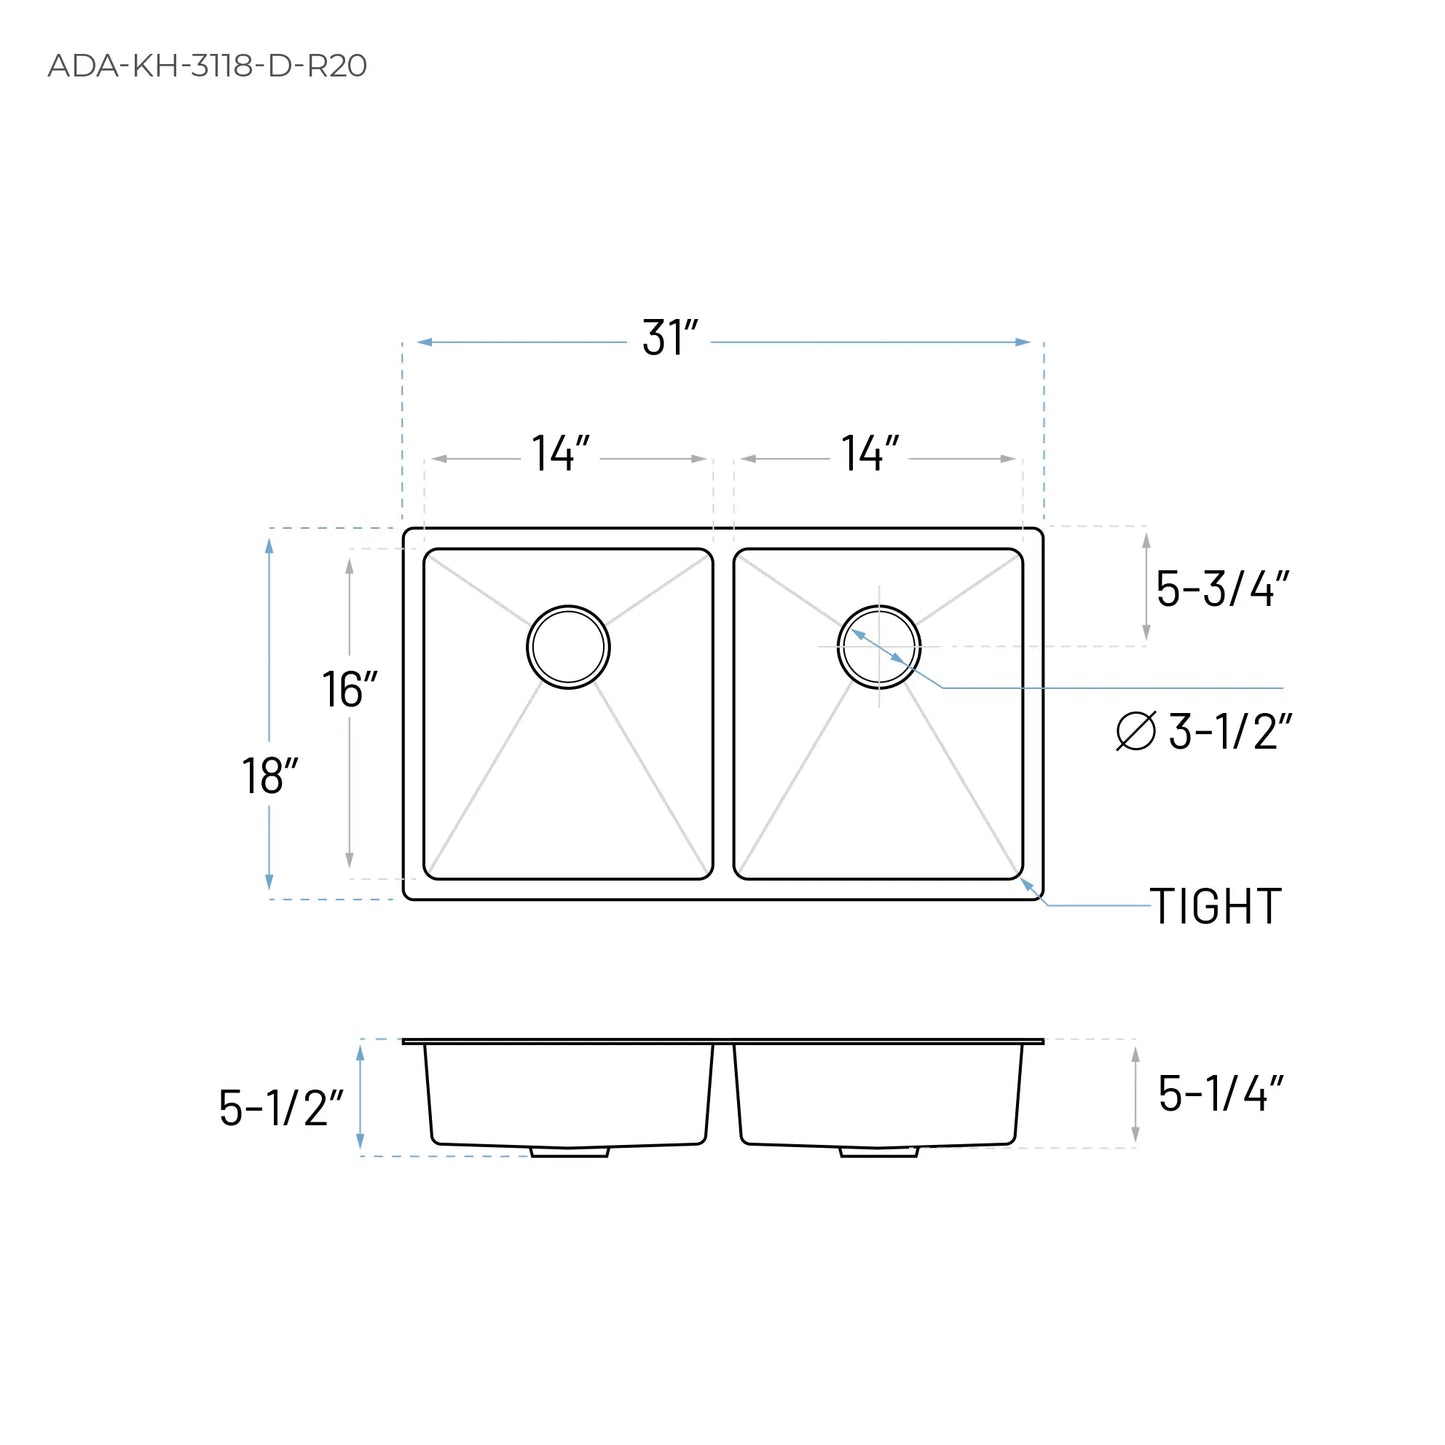 Technical Drawing of a Double Bowl ADA Kitchen Sink